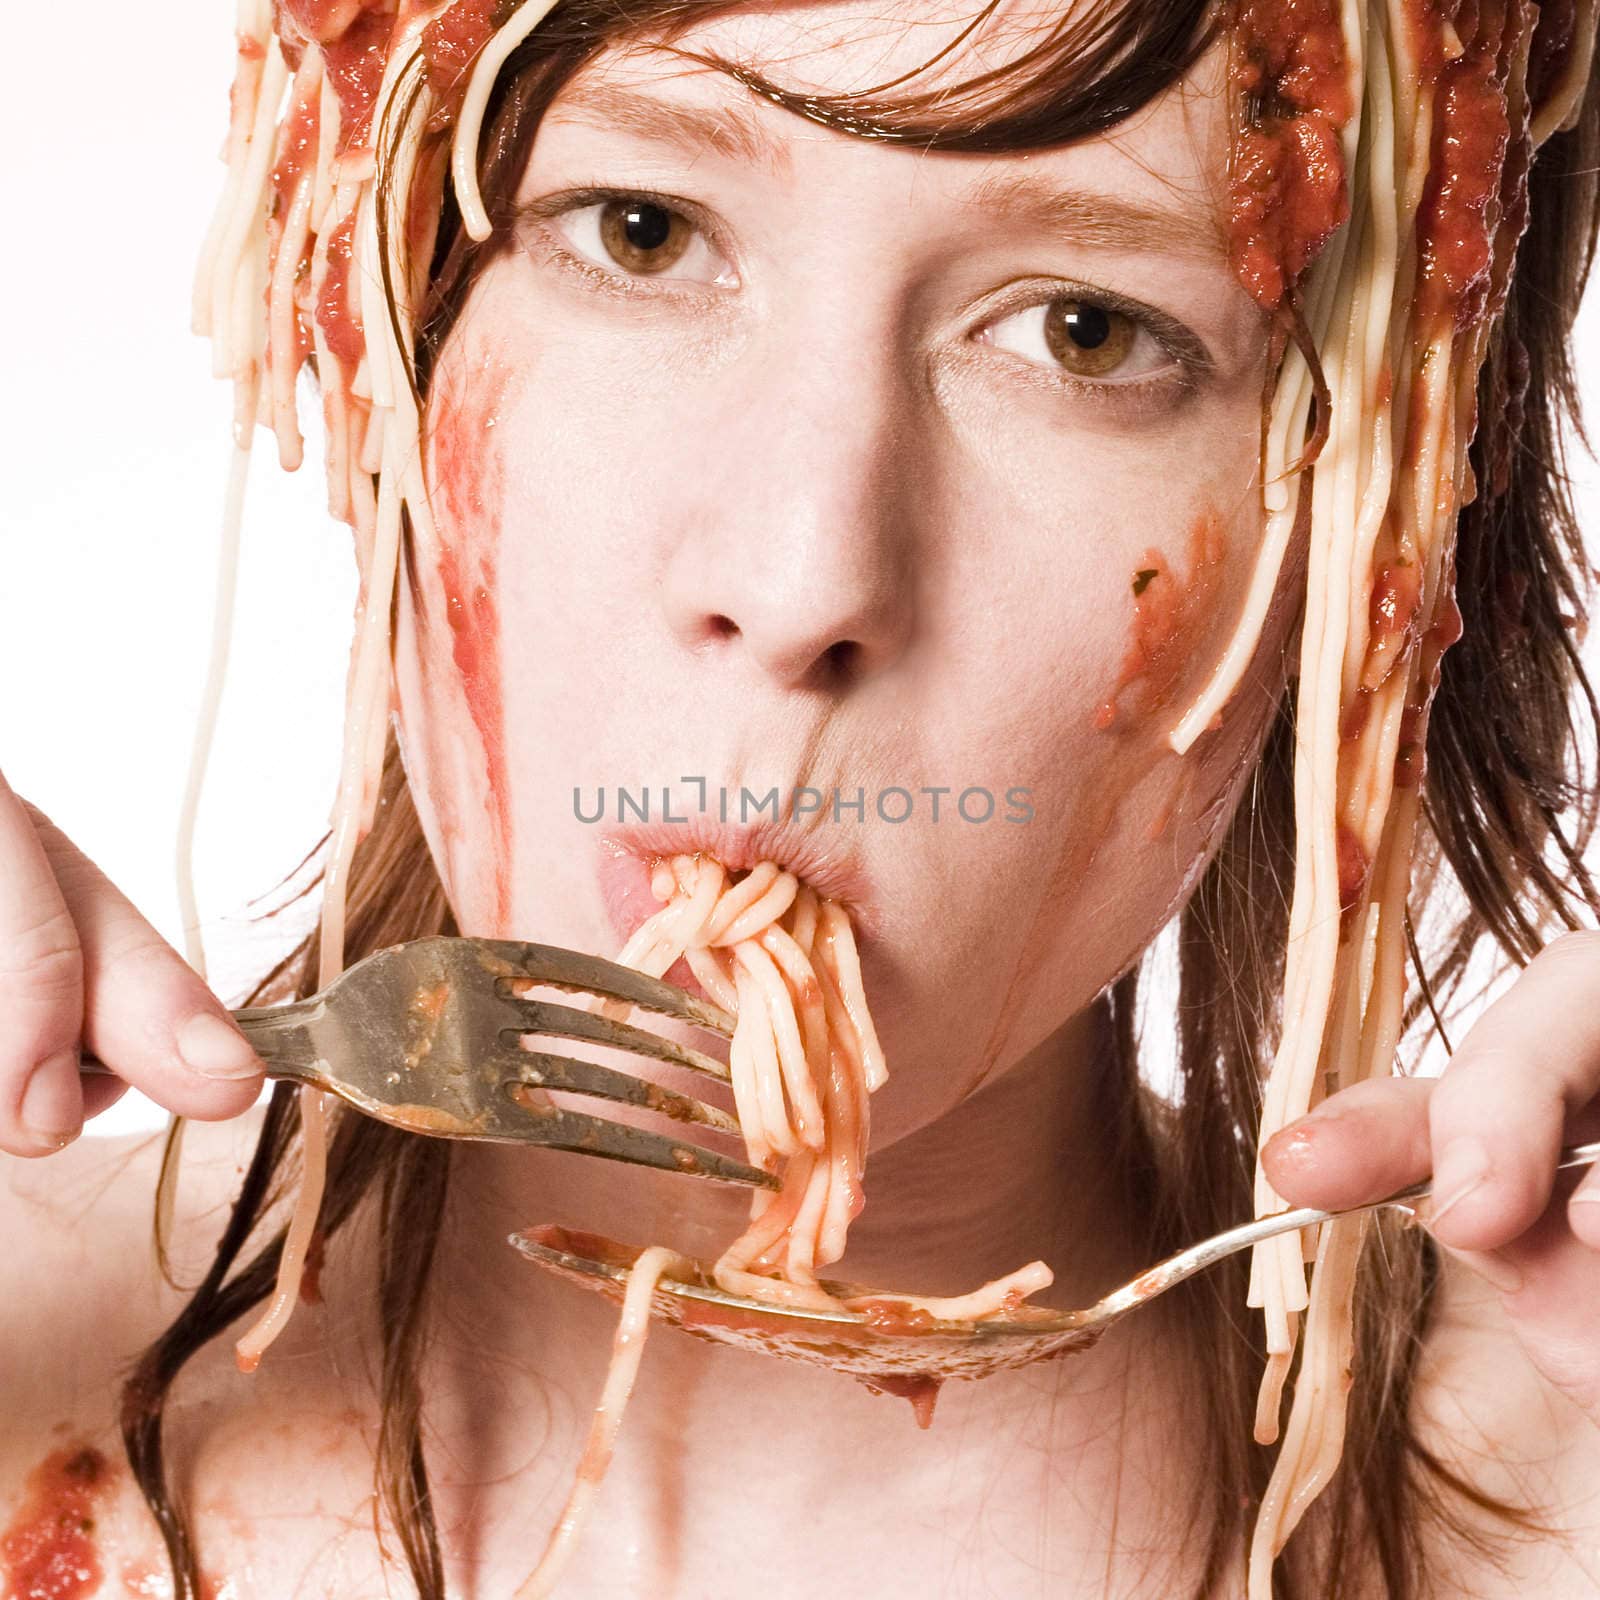 Eating spaghetti of my head by DNFStyle